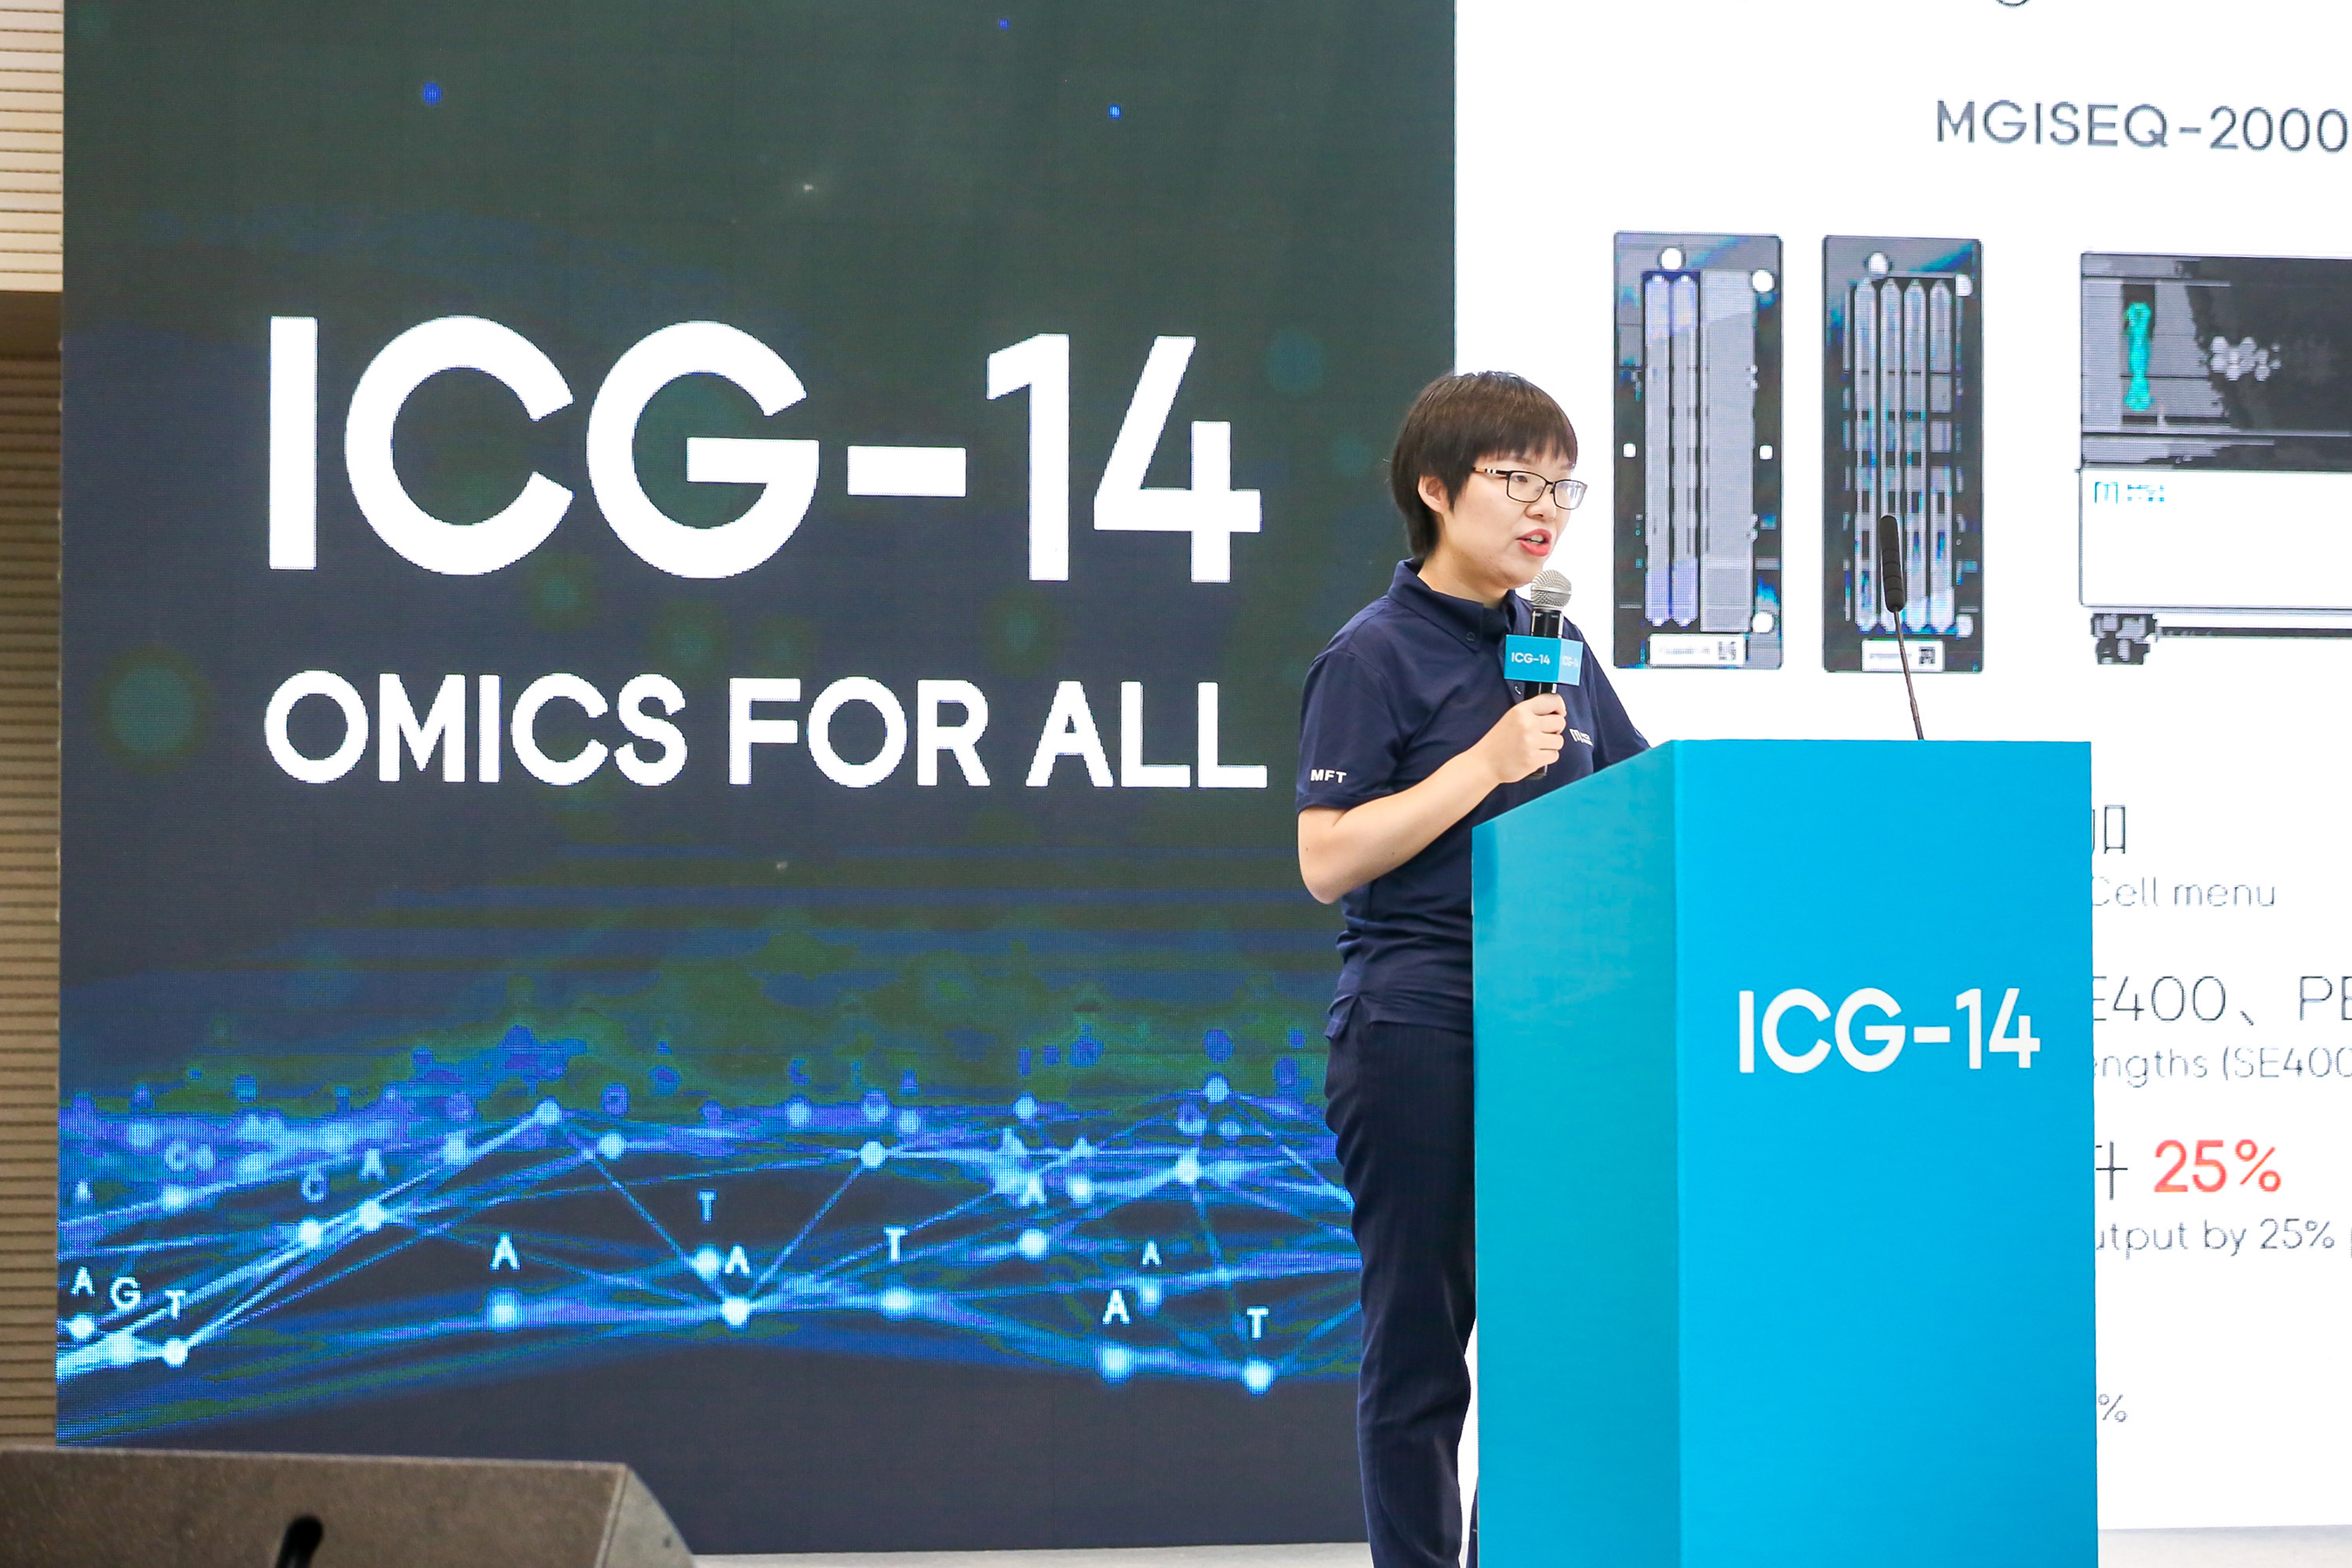 MGI Chief Operating Officer Jiang Hui introduces advances in MGI sequencing technology